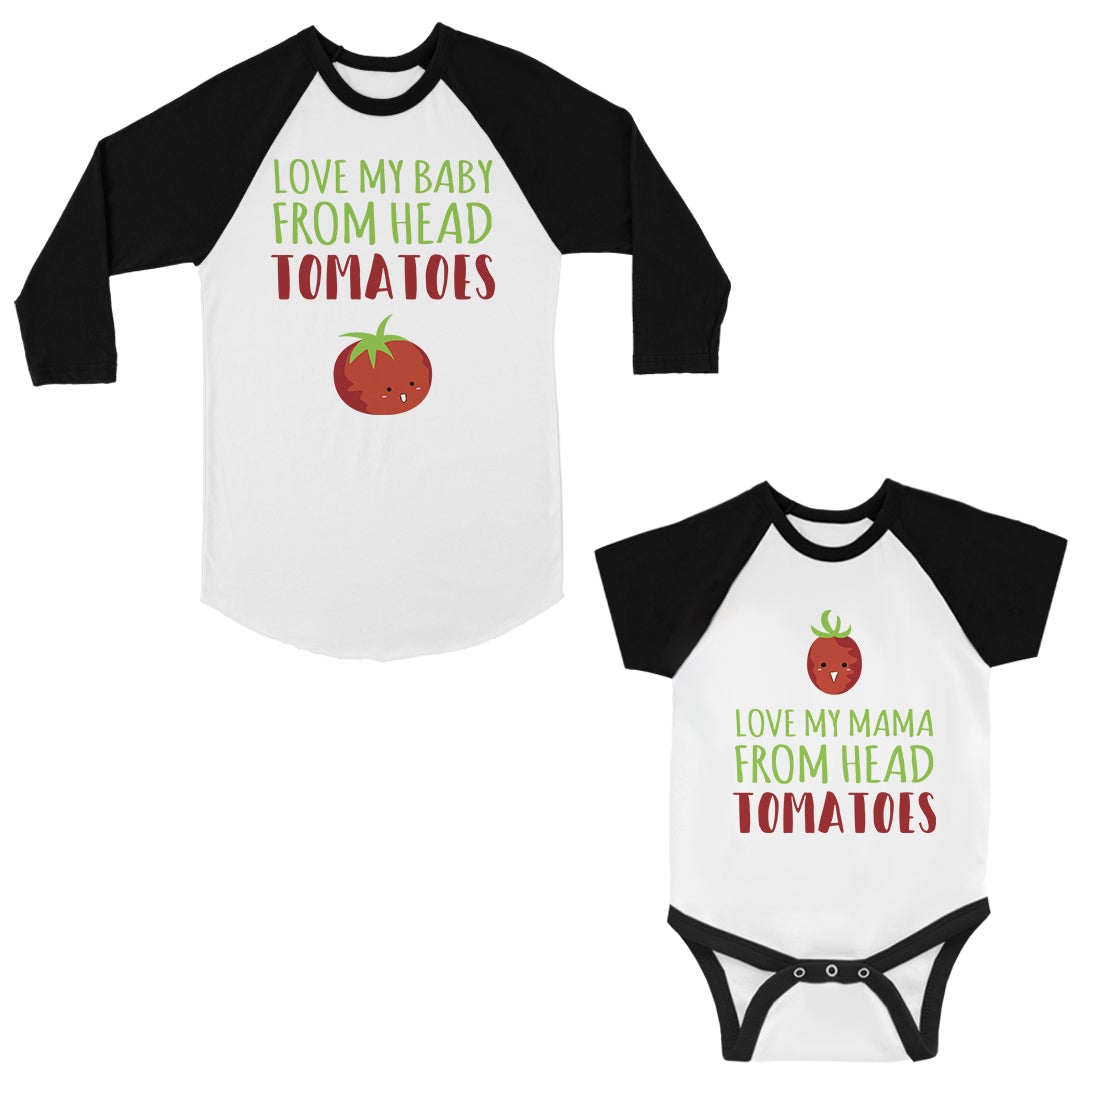 Love From Head Tomatoes Mom and Baby Matching Baseball Shirts Black and White